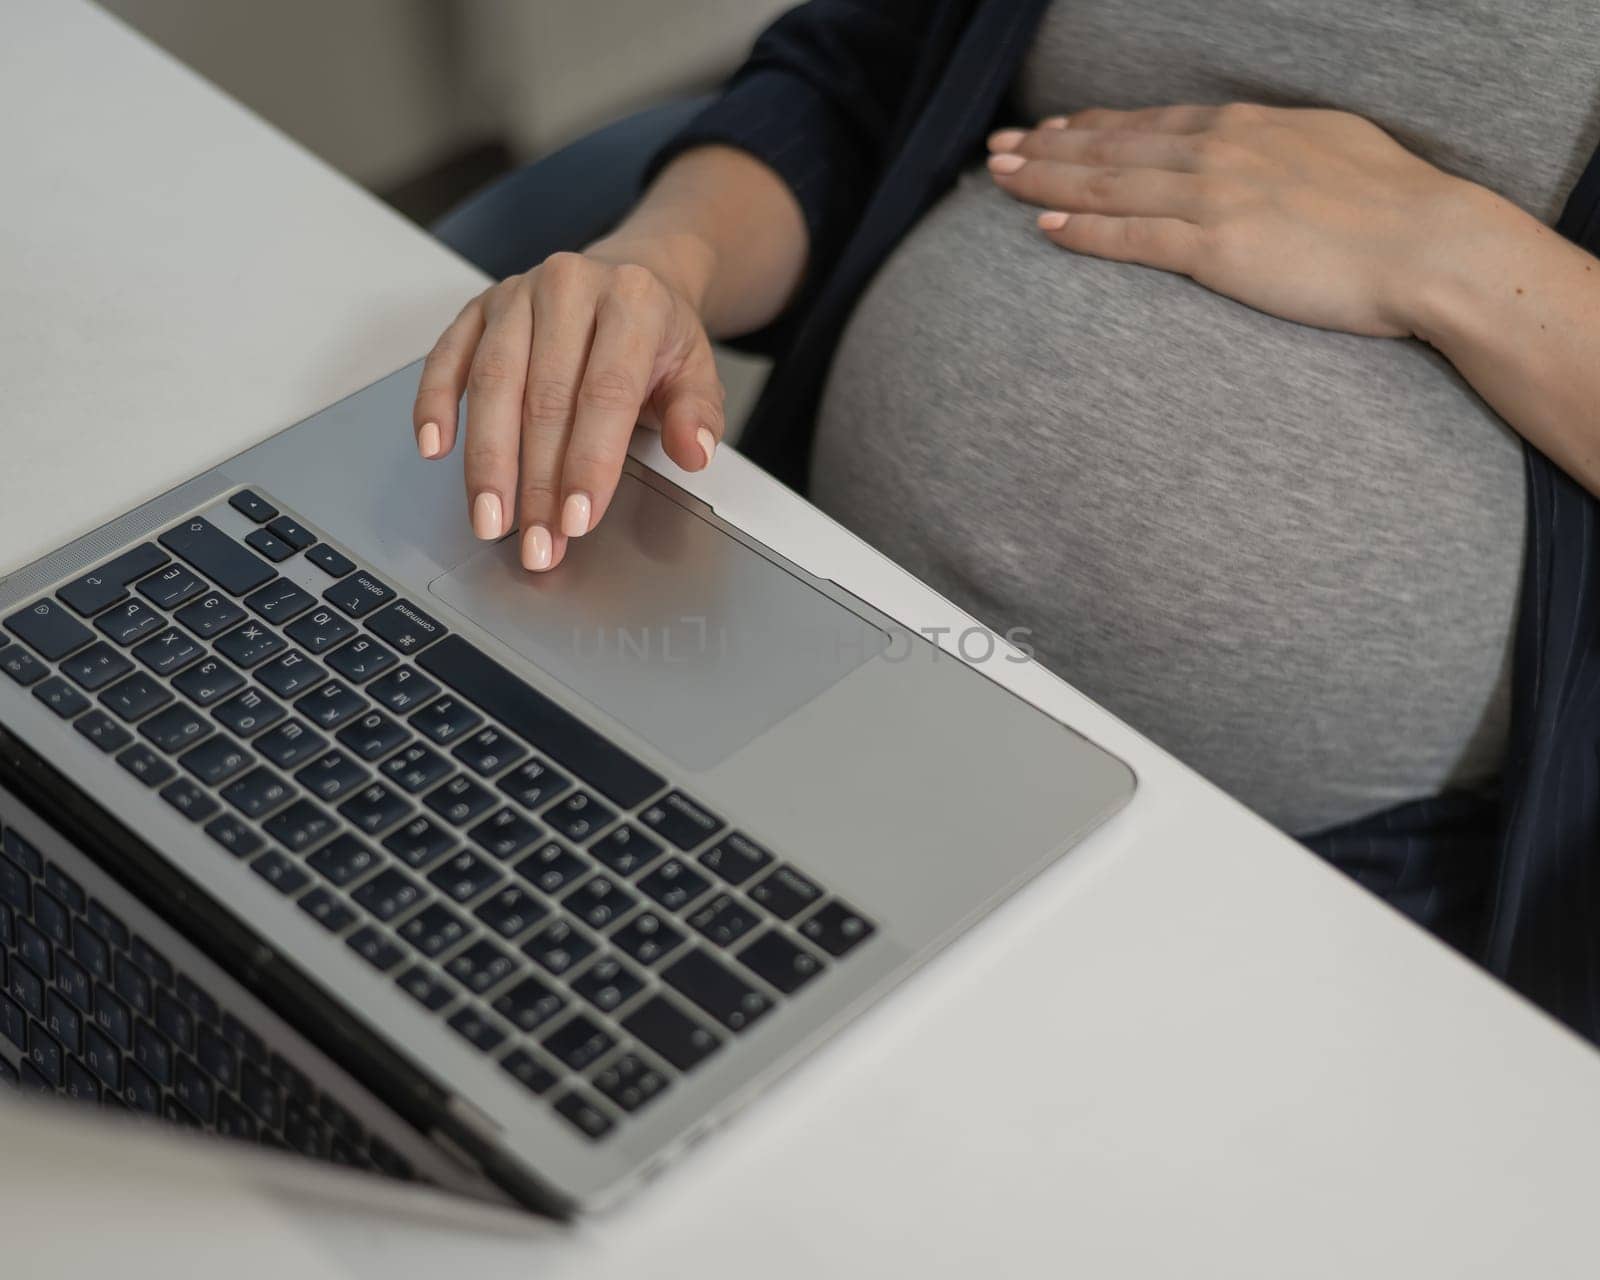 A pregnant woman works on a laptop in the office. Close-up of the tummy. by mrwed54